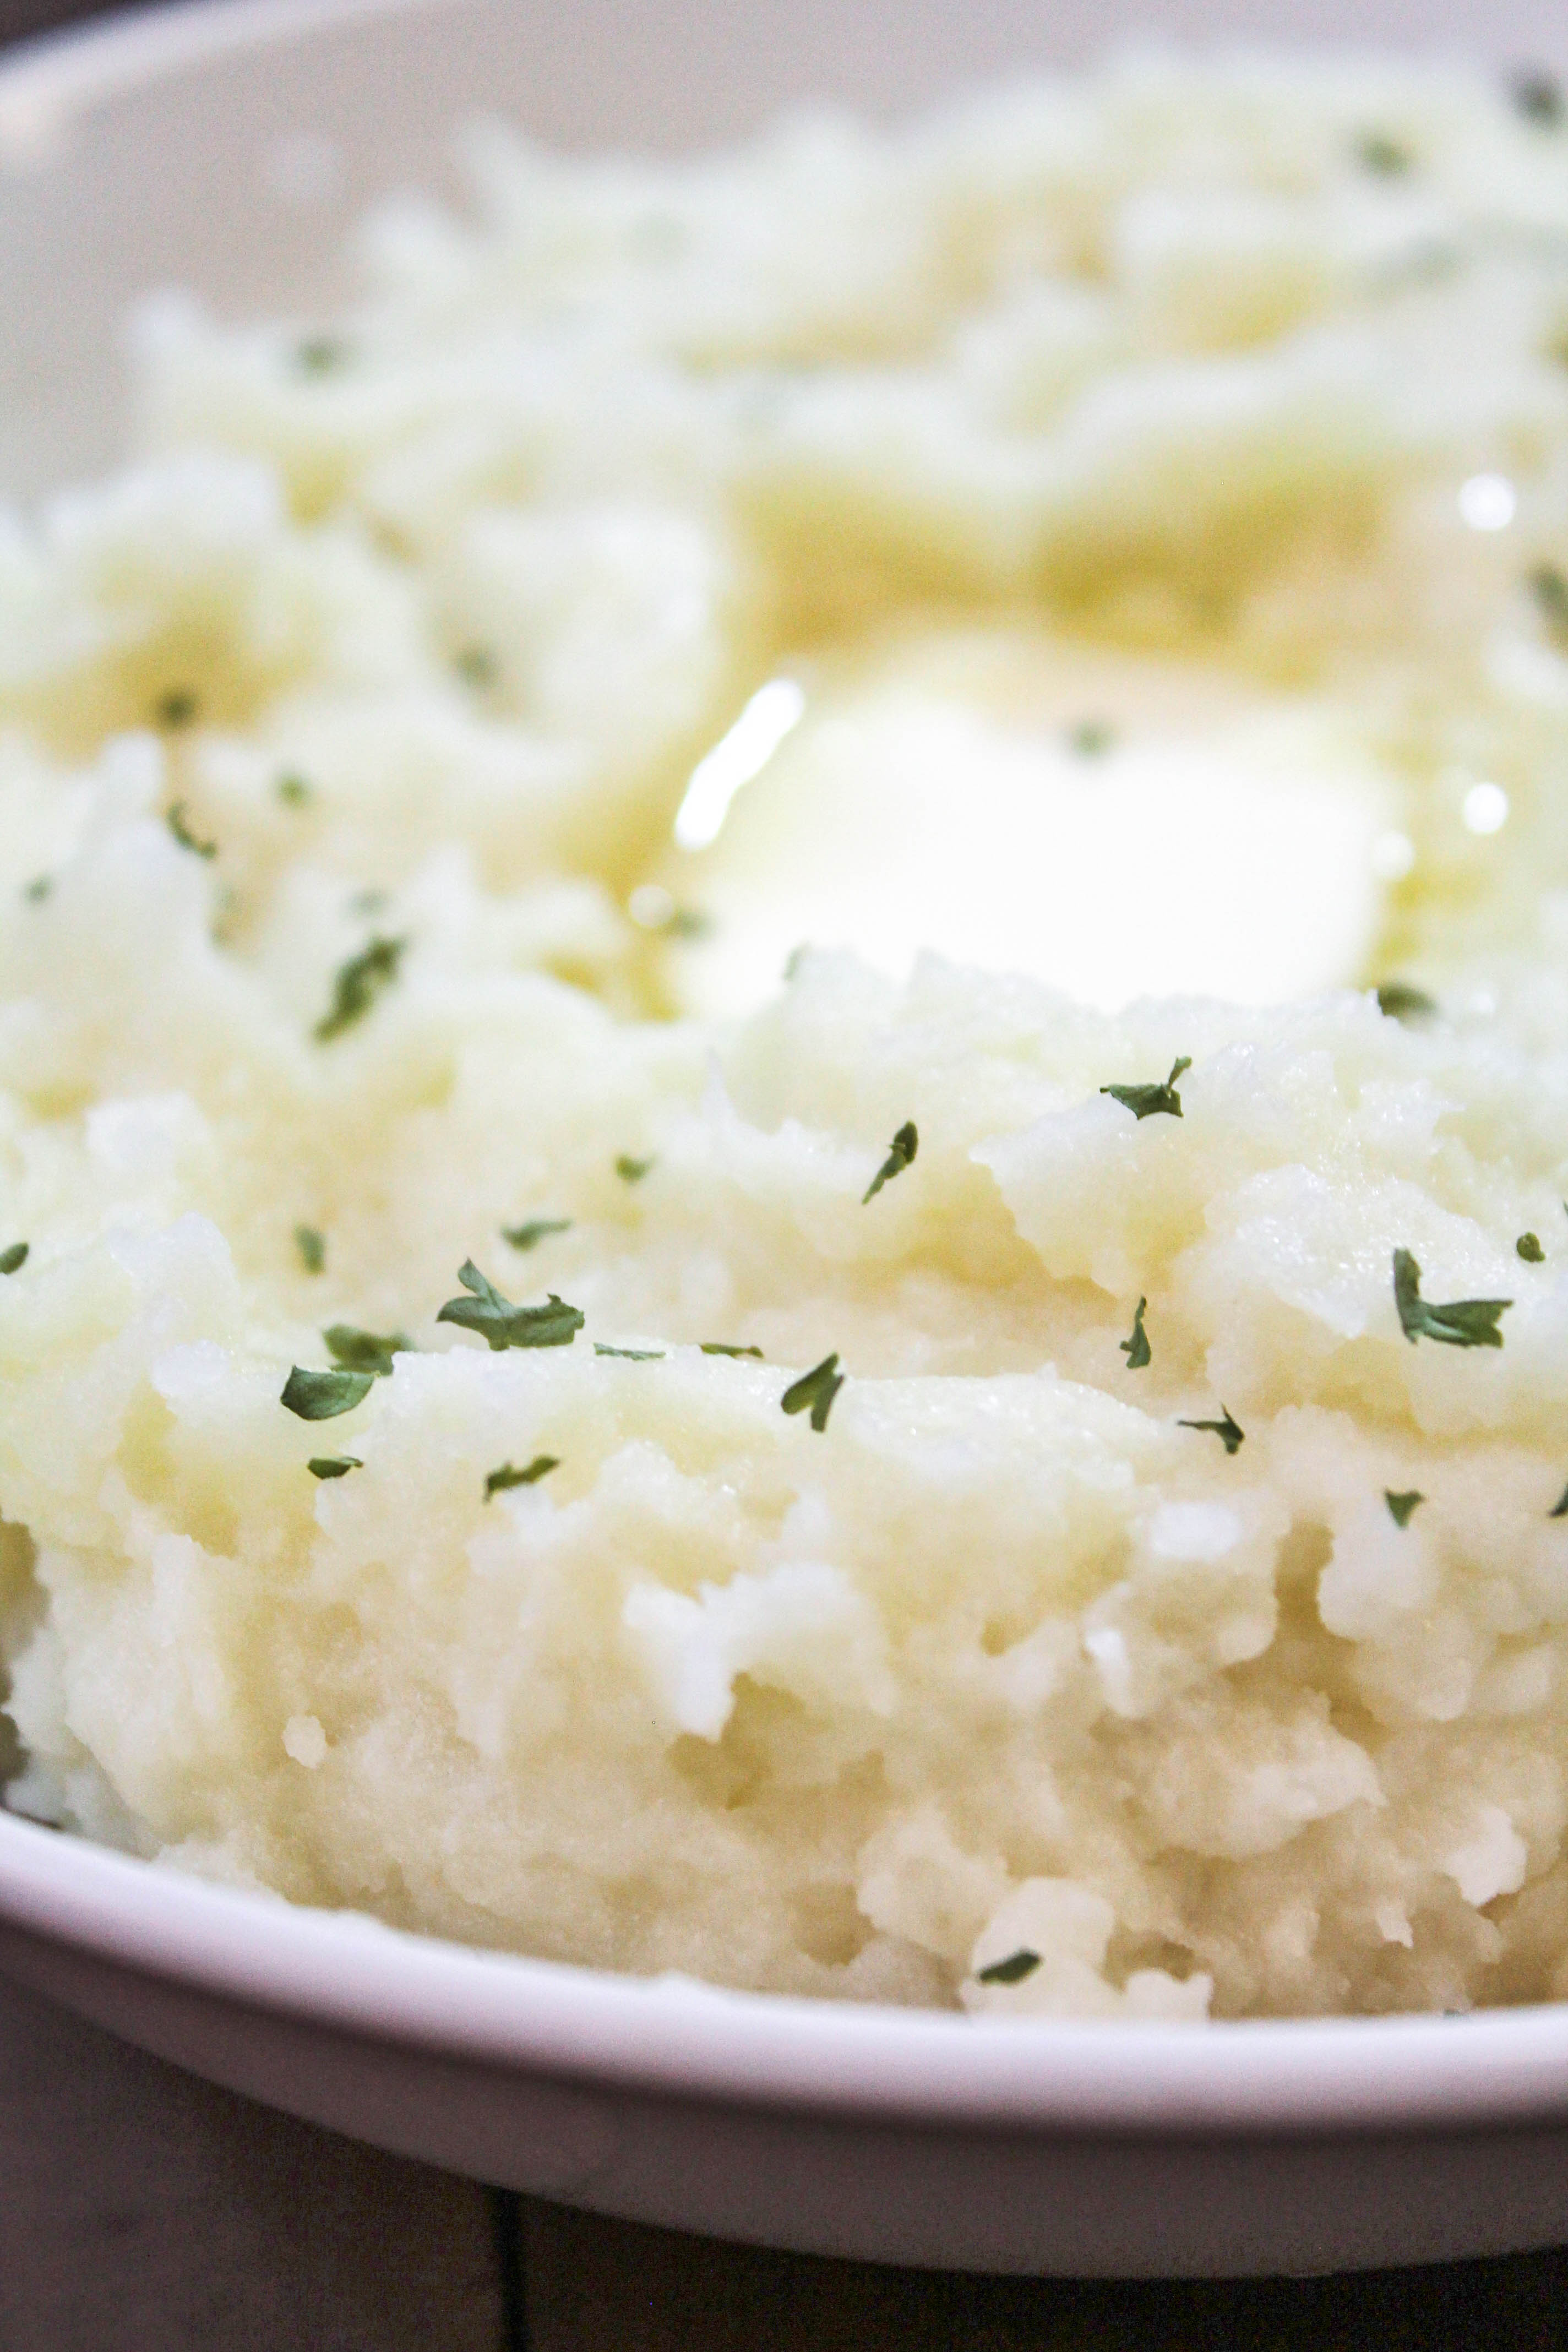 The creamiest, butteriest mashed potatoes made with half and half cream, salt, butter, and chives